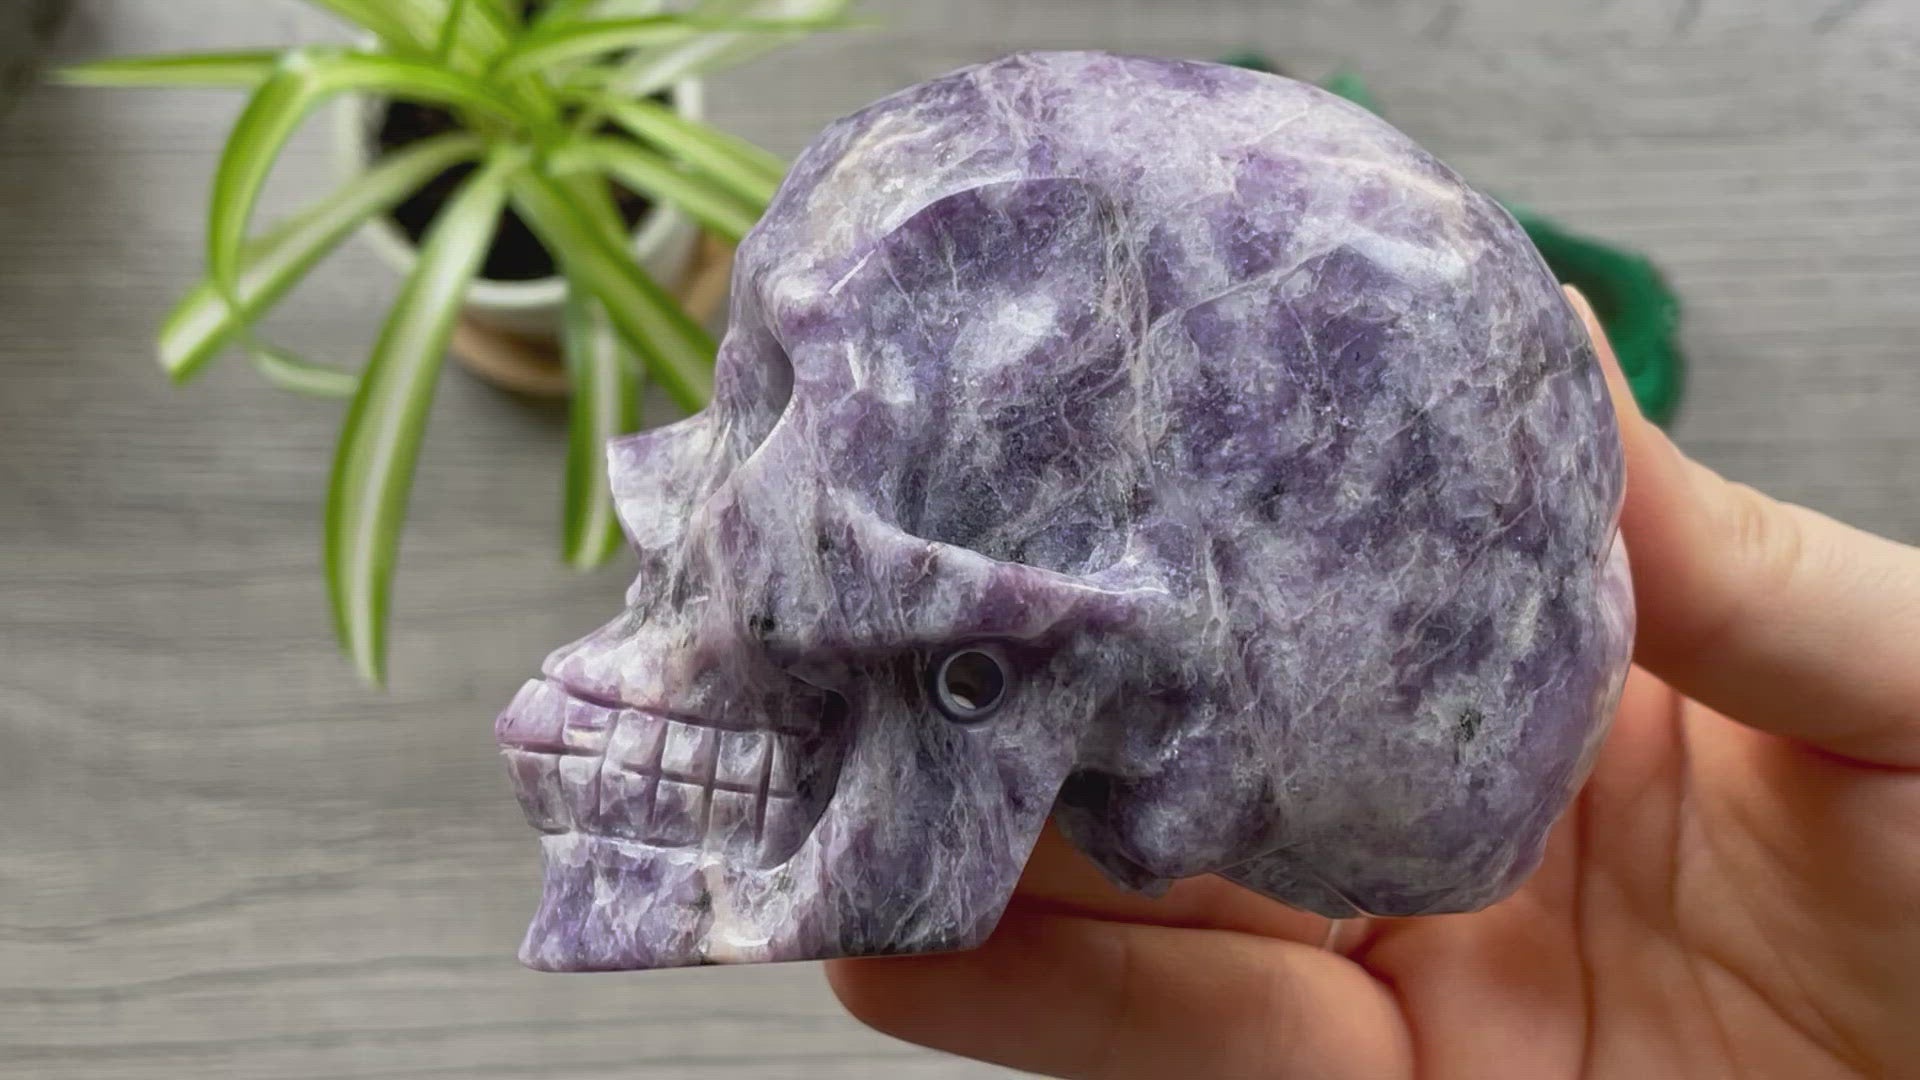 Pictured is a large skull carved out of lepidolite.